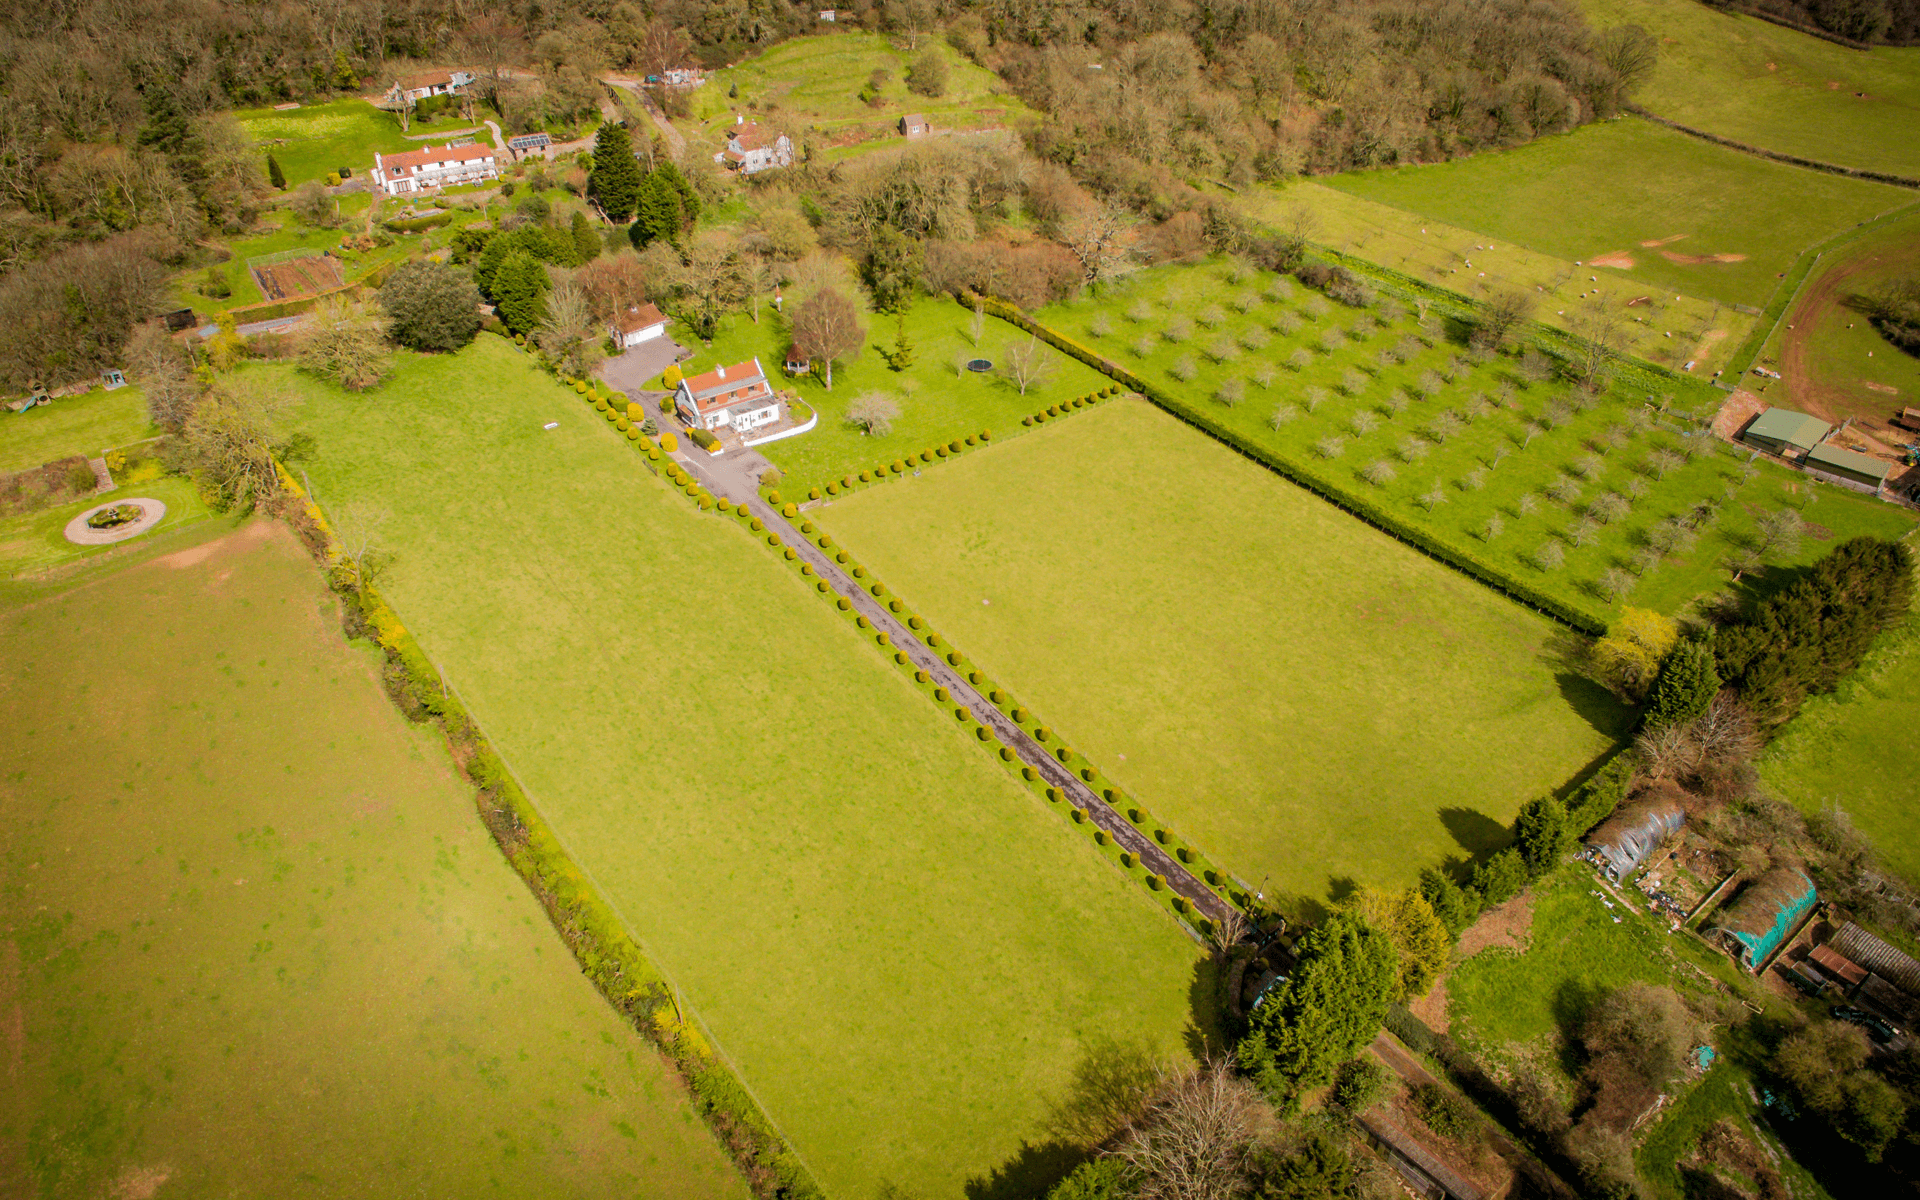 "Mavic Pro" aerial drone photo of house in Clevedon, Bristol for estate agency